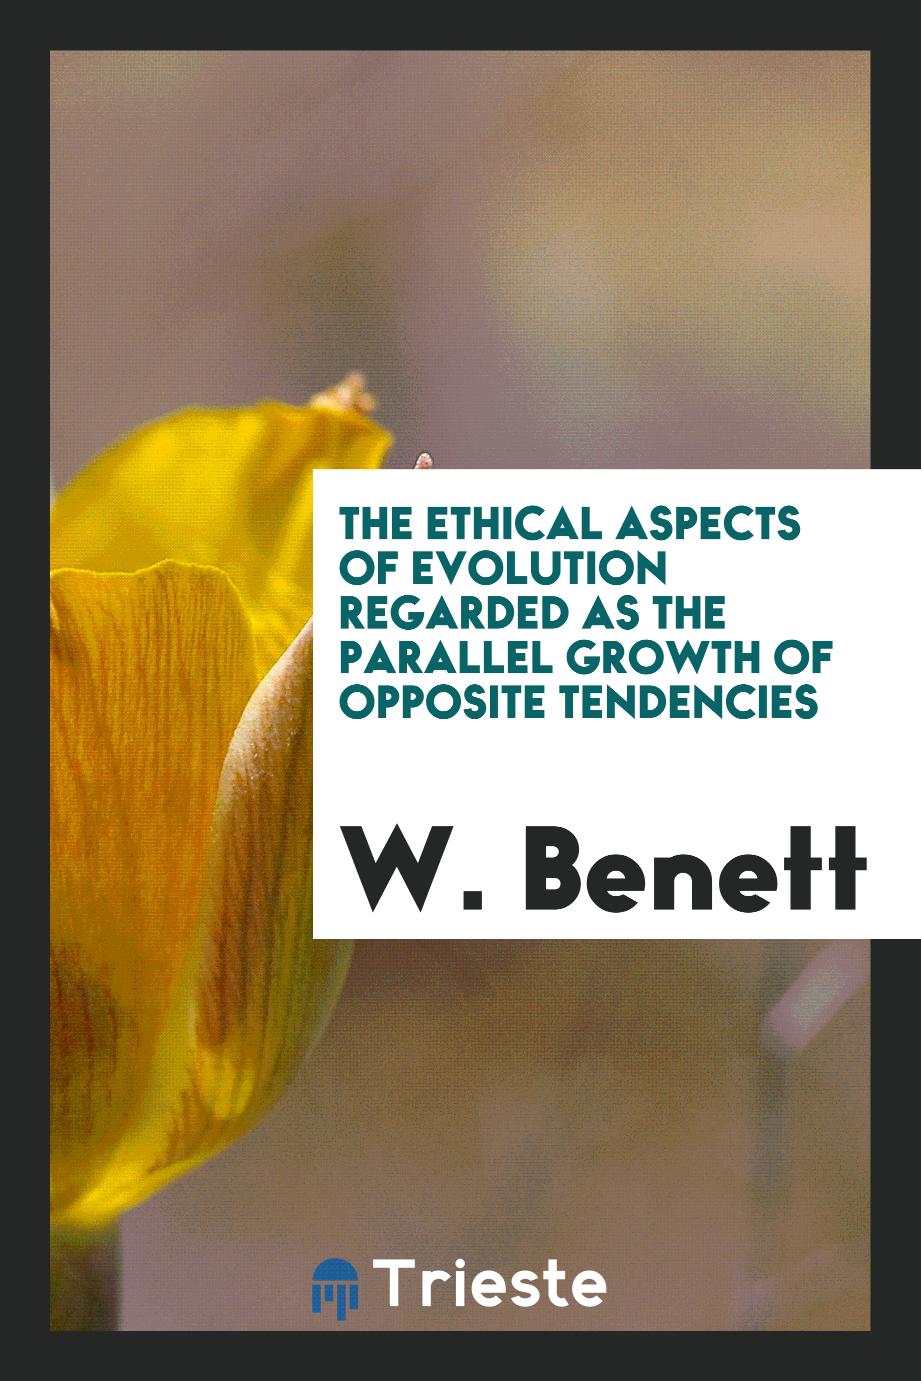 W. Benett - The Ethical Aspects of Evolution Regarded as the Parallel Growth of Opposite Tendencies